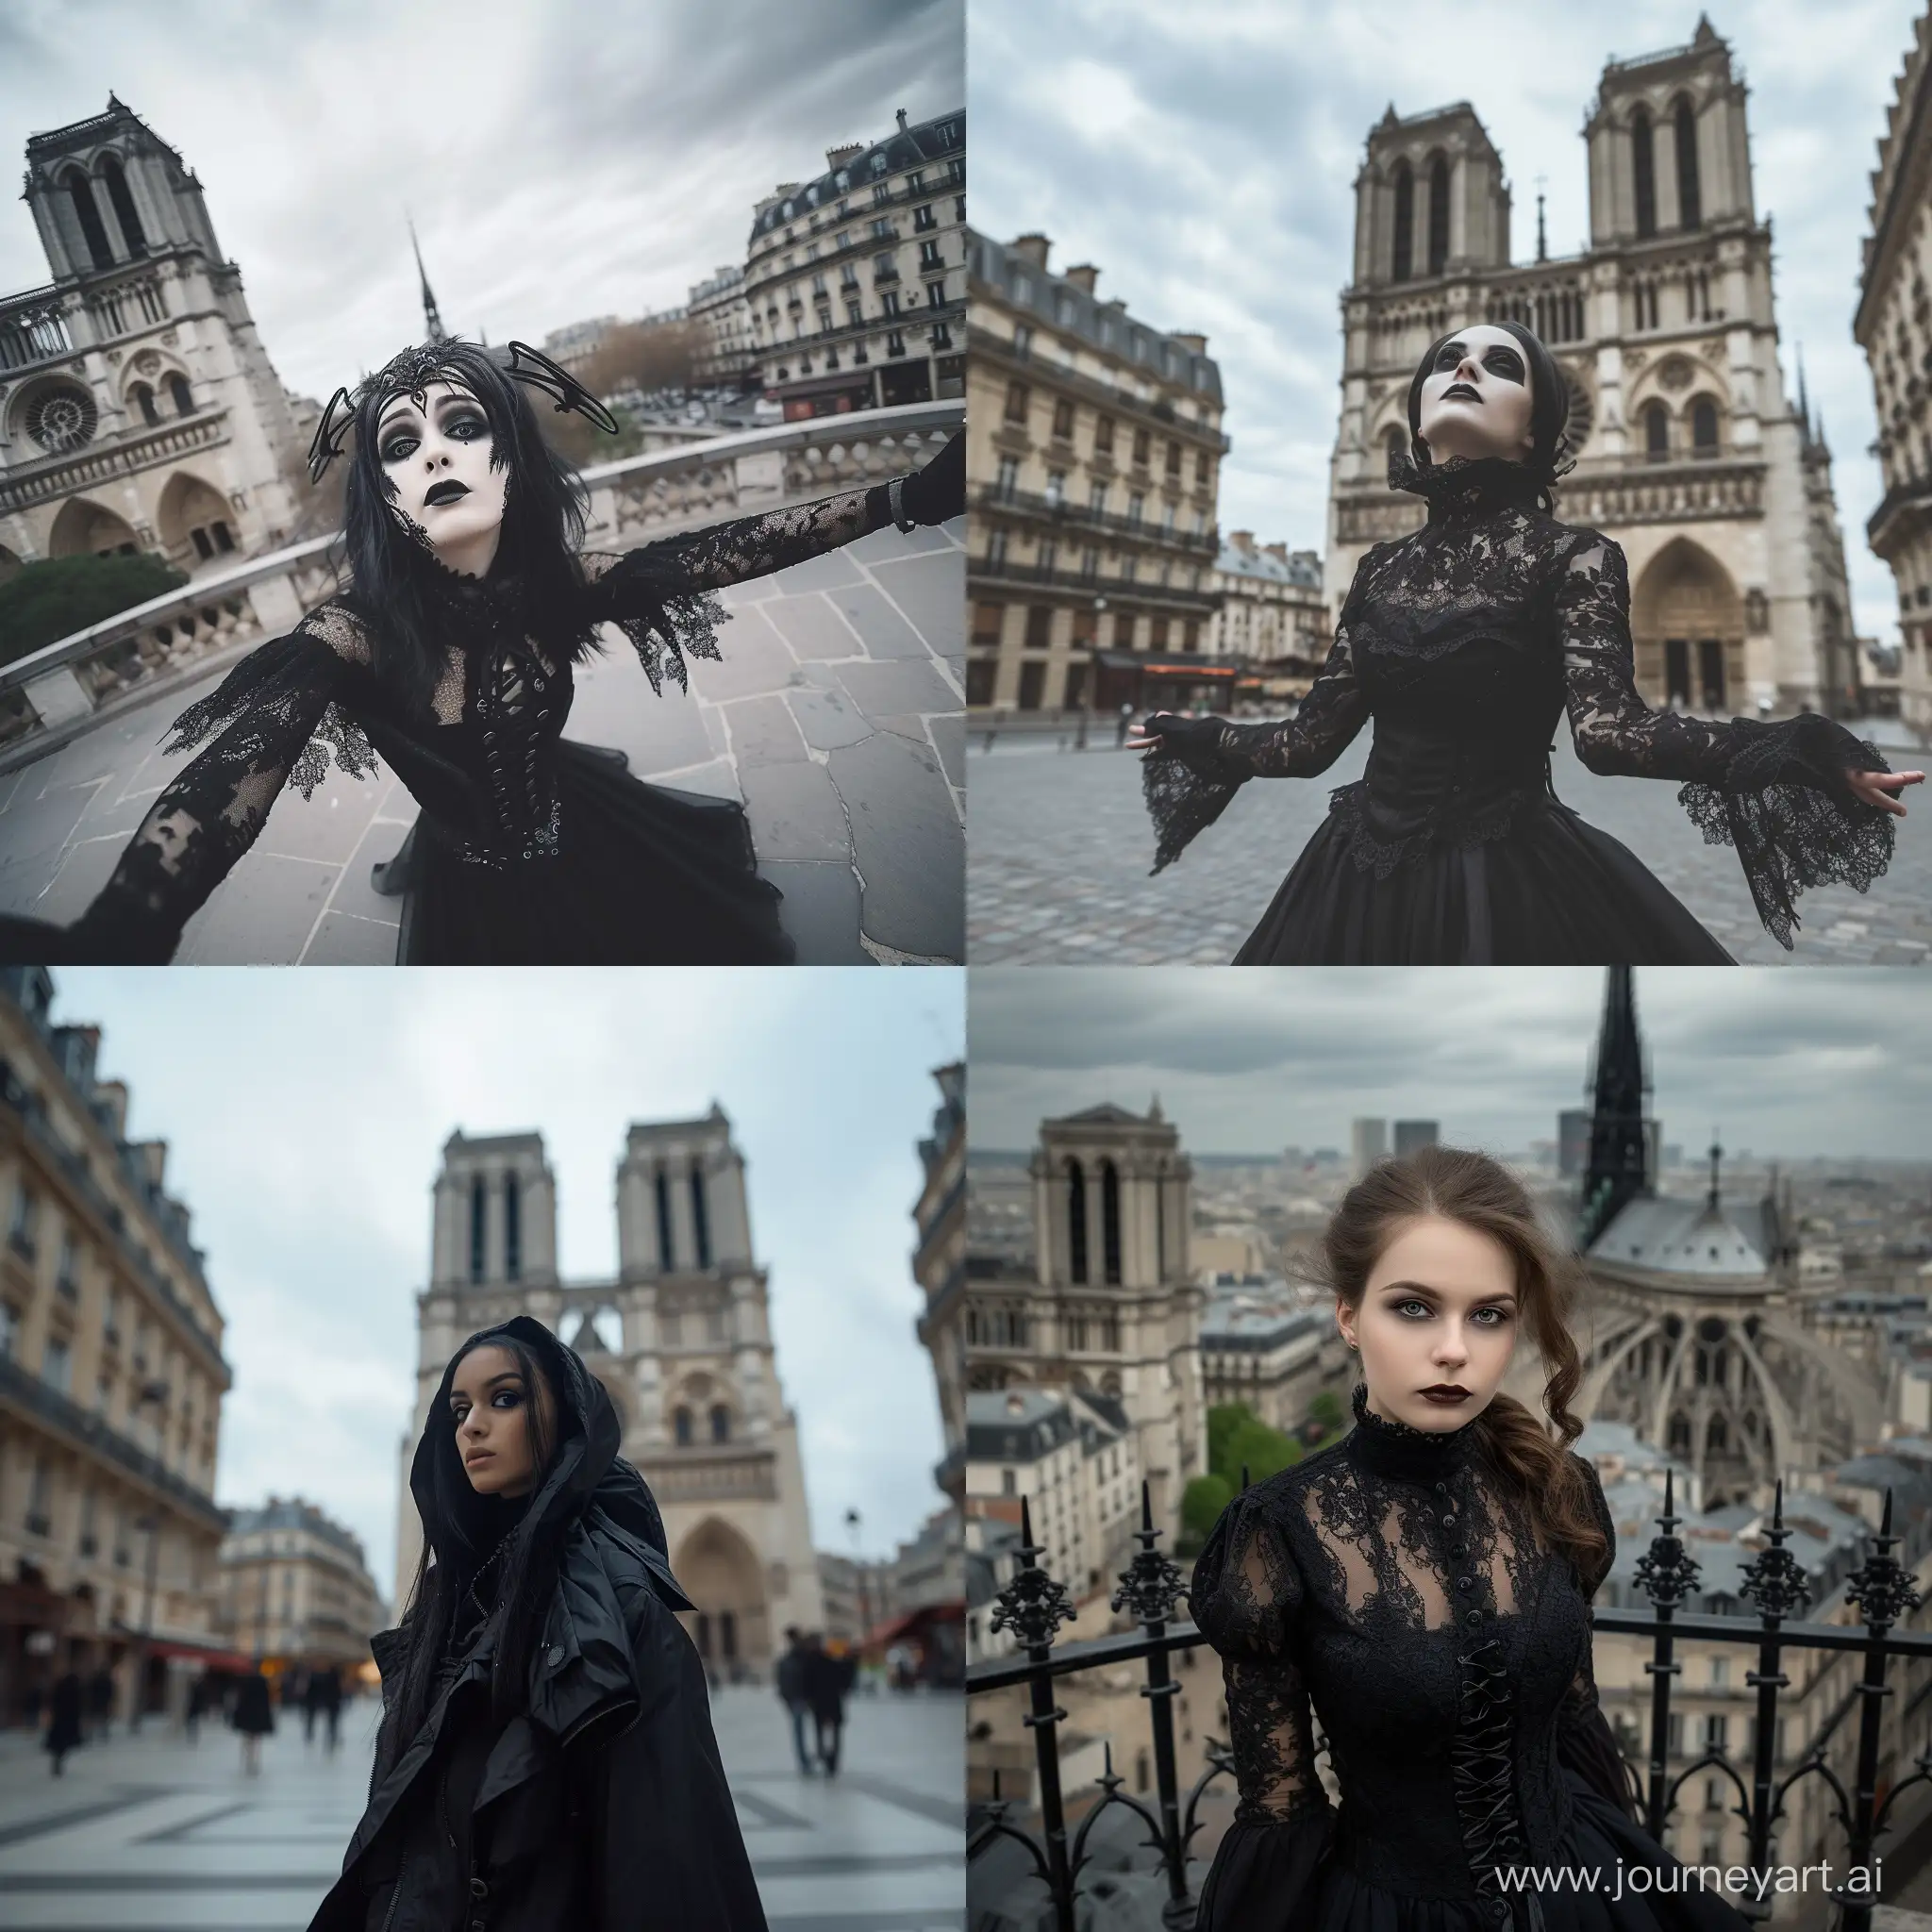 /img gothic photo session, in the style of "Gothic chic" a woman in a Gothic image on the background of Notre Dame De Paris. wide-angle lens, open, aggressive poses, black style, bottom view, daytime photo session, all the buildings of Notre Dame De Paris are placed in the frame, picture will be more brightness, picture without vignette девушка модель с короткими черными волосами, strong face, открытый наряд